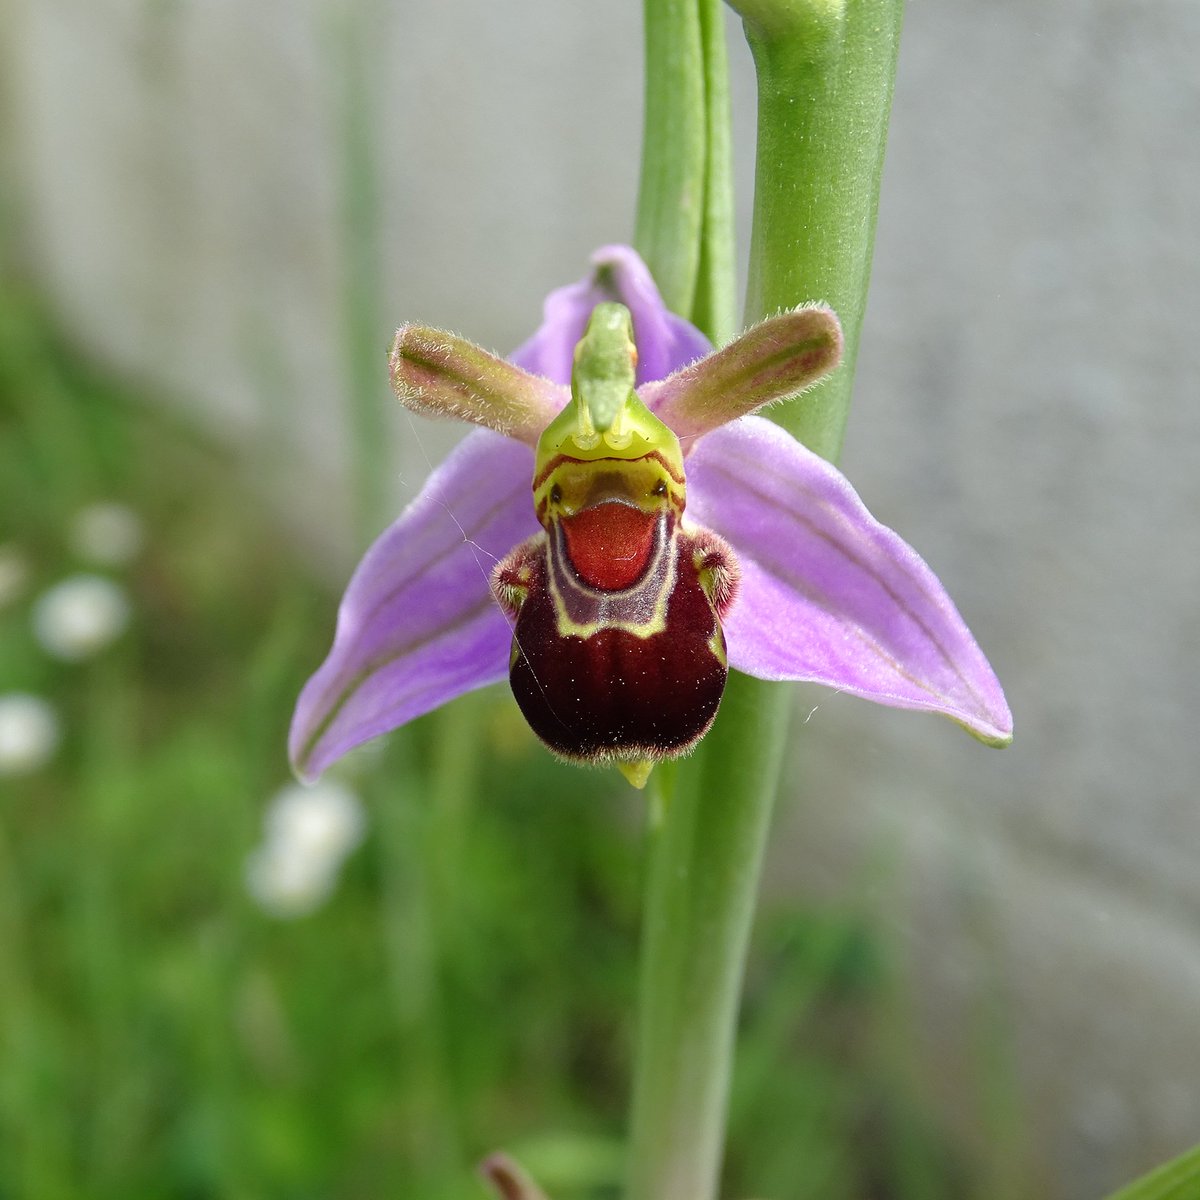 Bee orchids are beginning to flower @RoyalHolloway campus, just in time for the start of @RHULBioSci practical field ecology course on Monday! #wildflowerhour